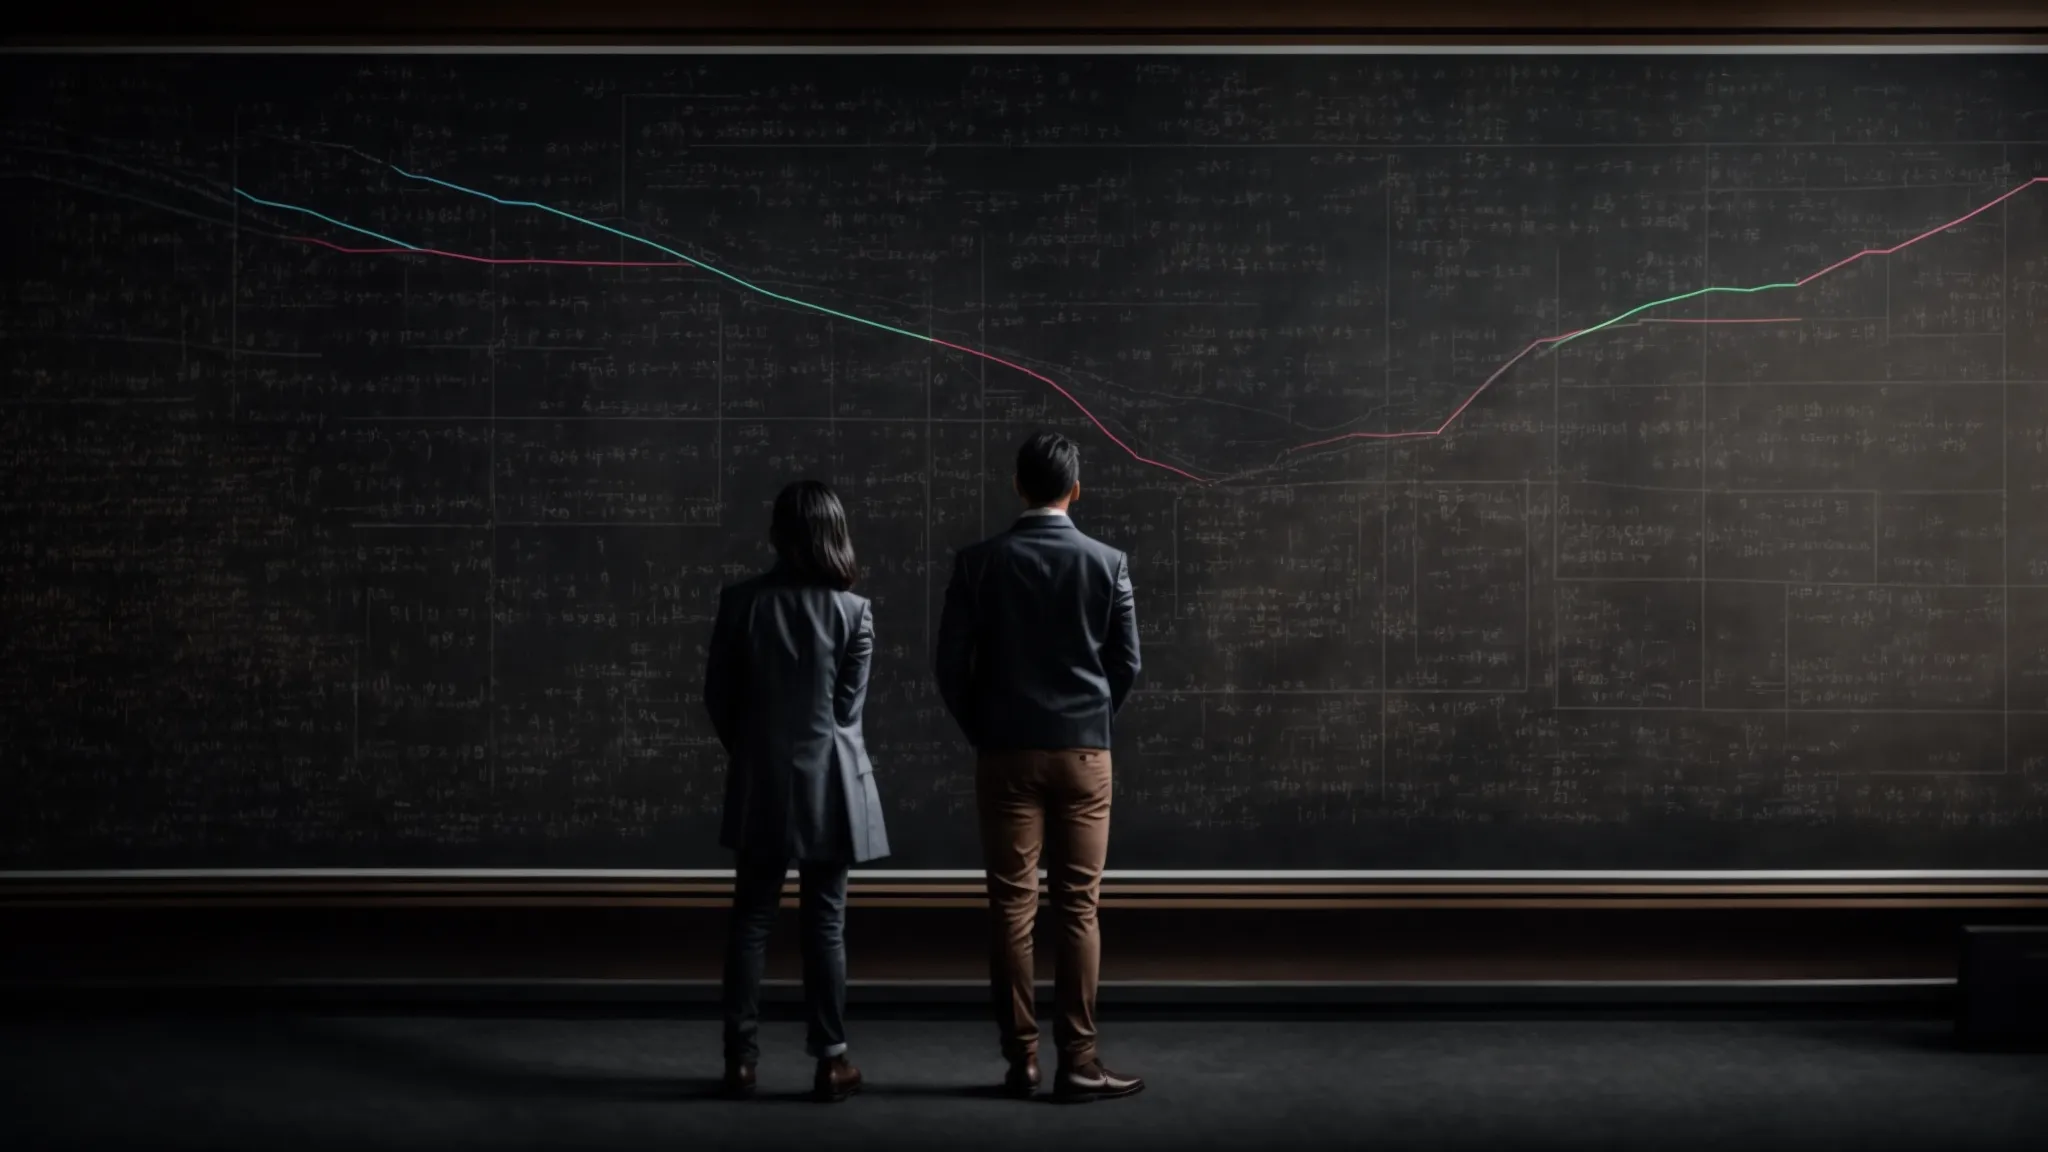 a person stands before a massive blackboard, crowded with graphs and mathematical equations that relate to daily life scenarios, pointing at a specific curve that models a budget constraint.